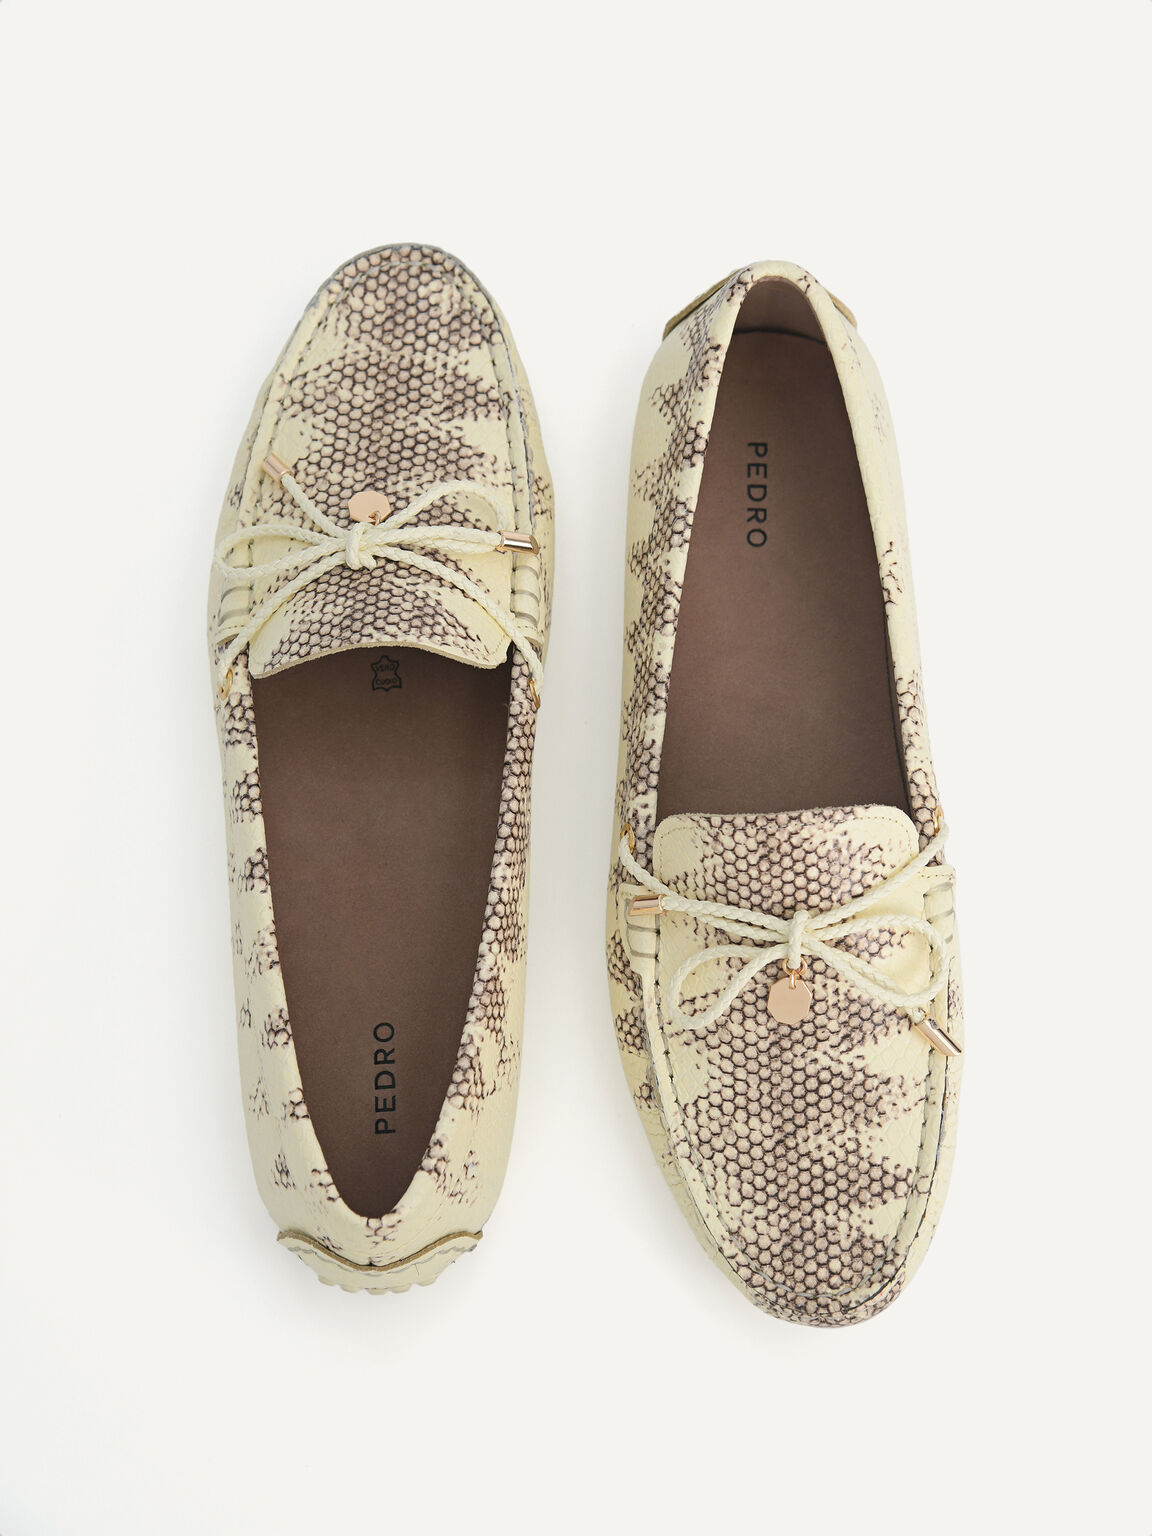 Textured Leather Bow Moccasins, Multi